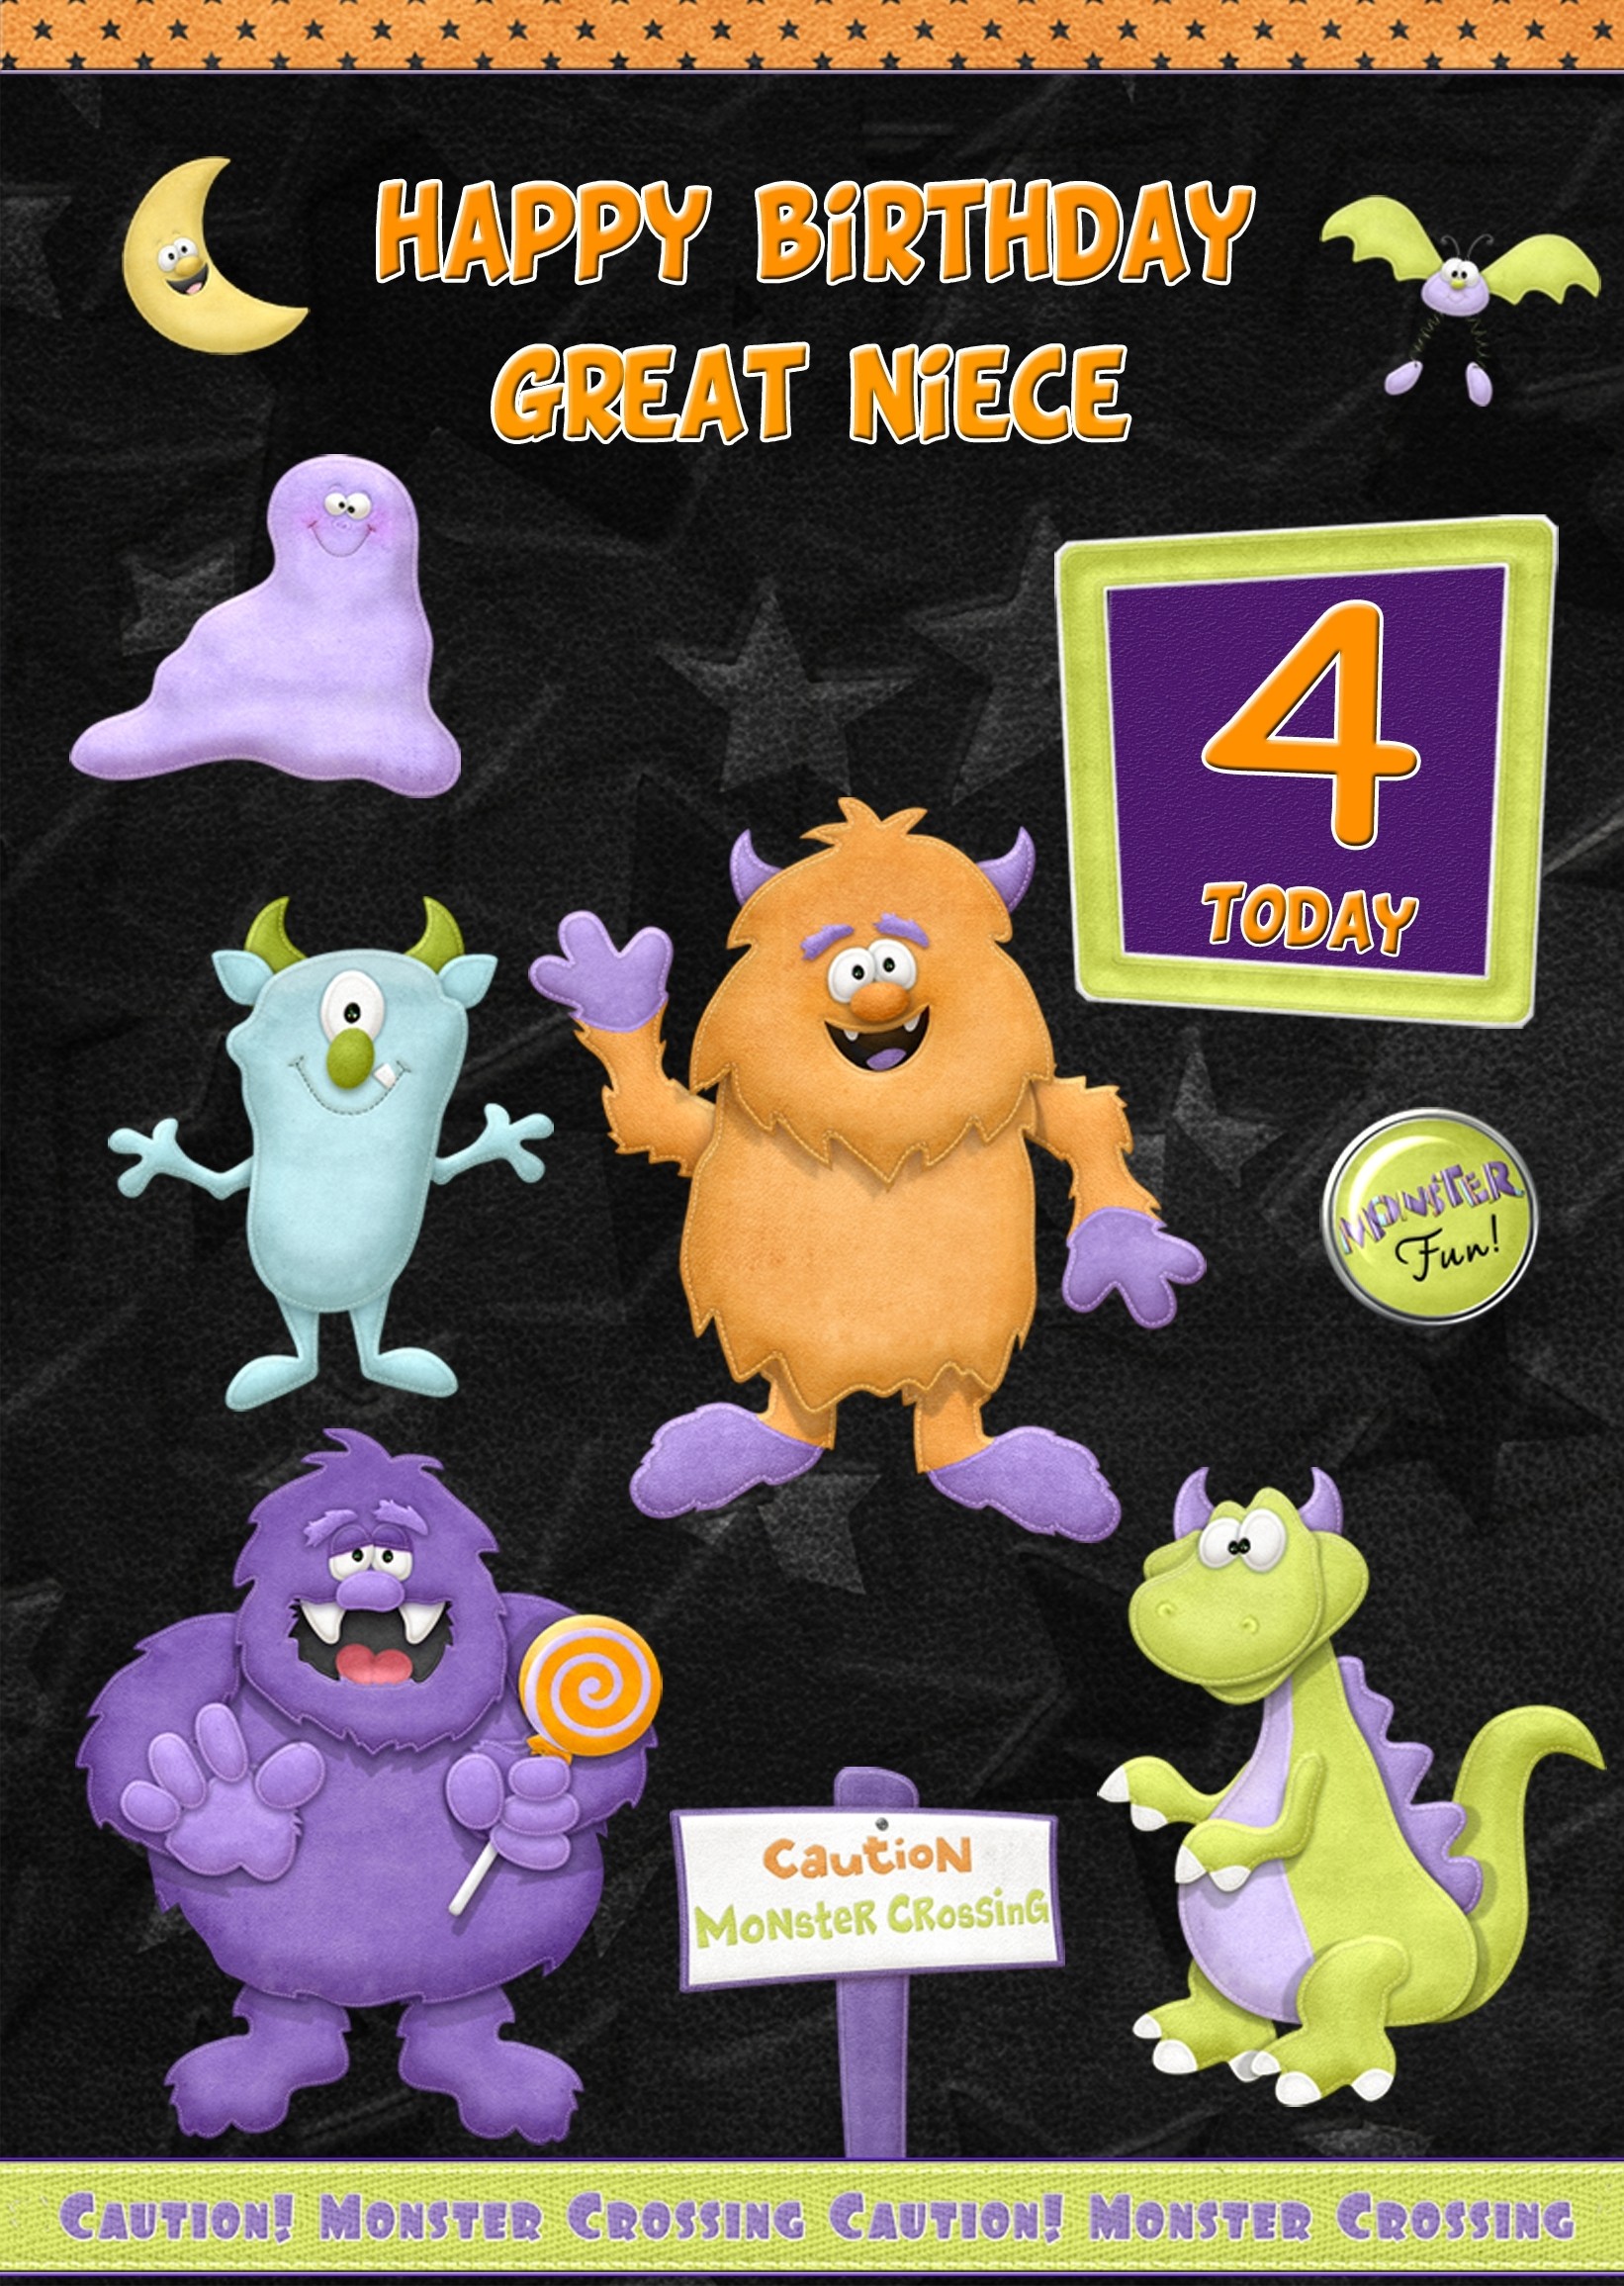 Kids 4th Birthday Funny Monster Cartoon Card for Great Niece